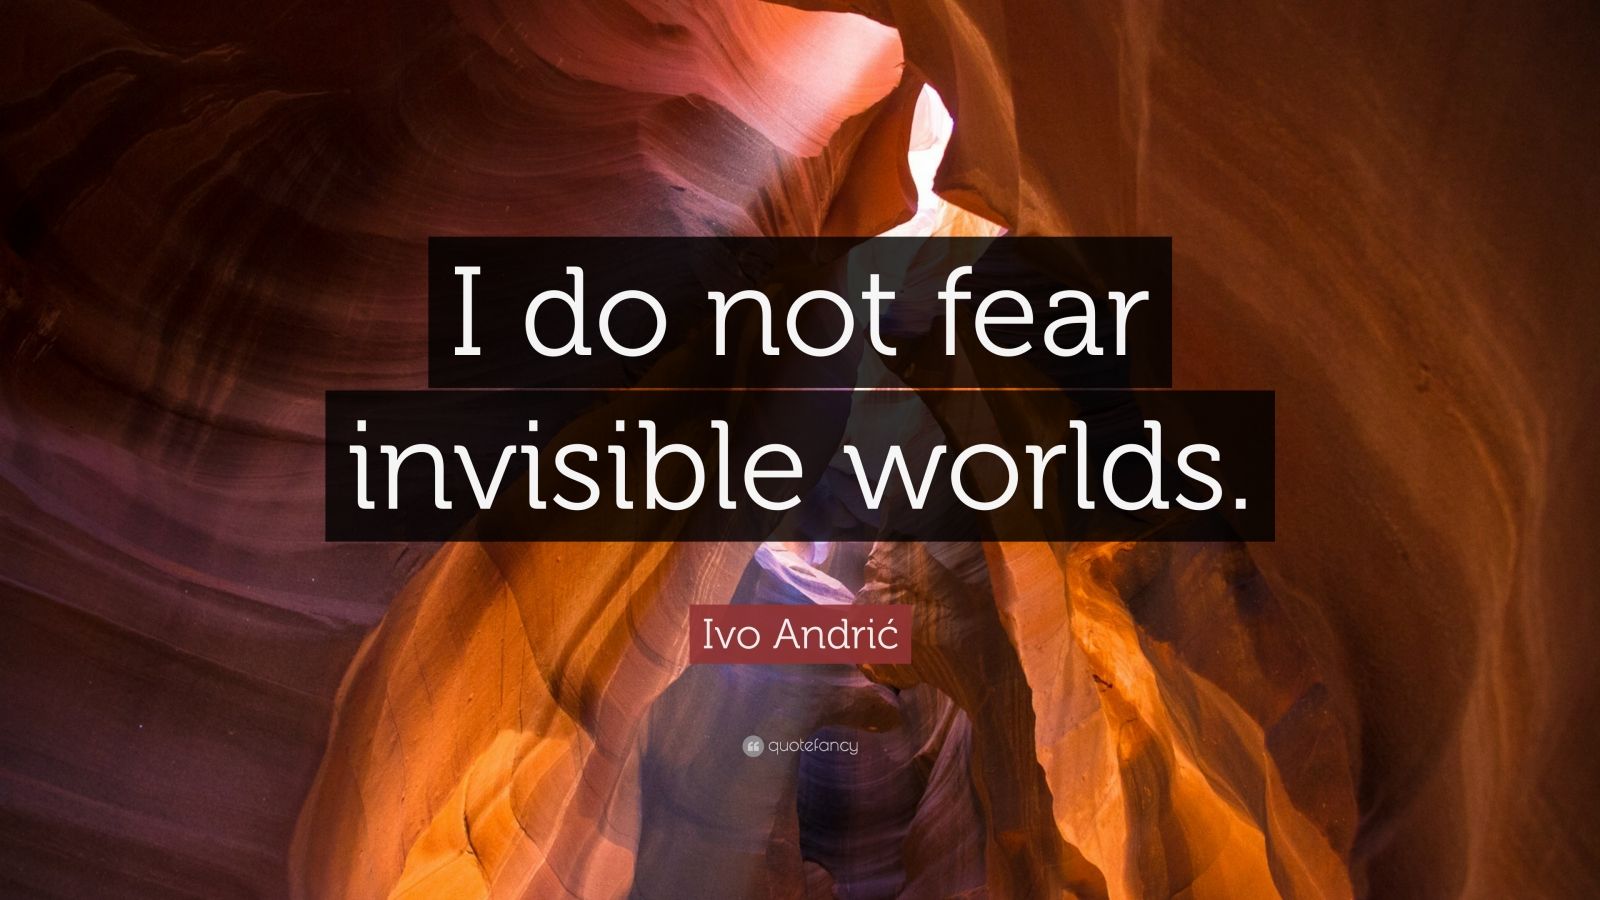  The image is a quote that reads, "I do not fear invisible worlds," with a canyon in the background.